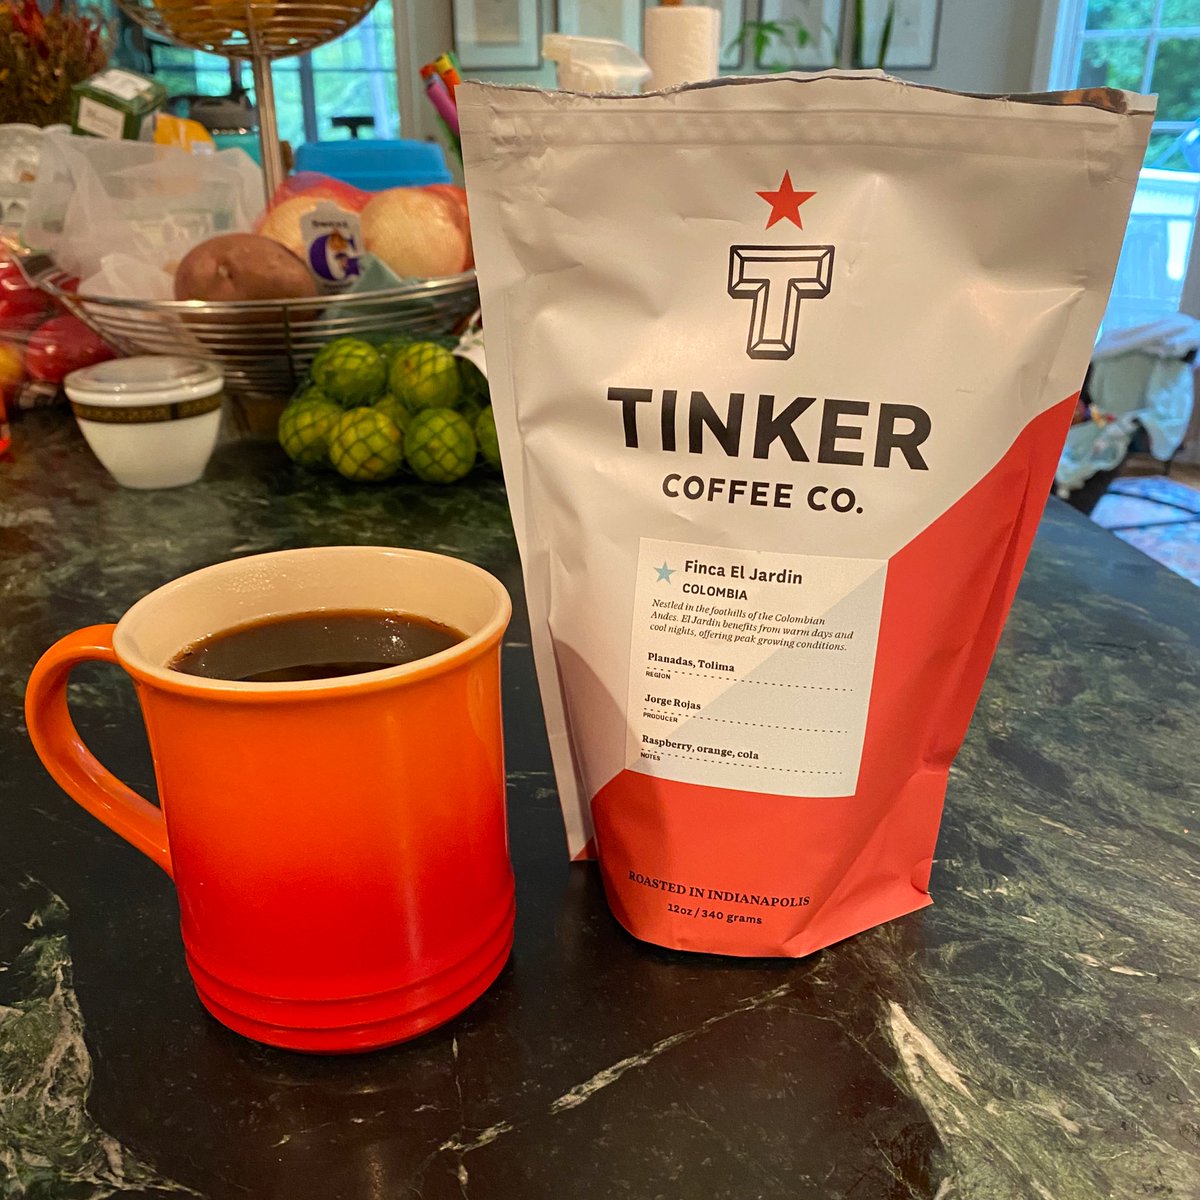 Tinker Coffee Co. Finca El JardinThis one is a real treat, like biting into a dark, bitter, fruity, delicious chocolate bar. It hits you right up front with a ton of flavor and then mellows out in a truly delightful way.